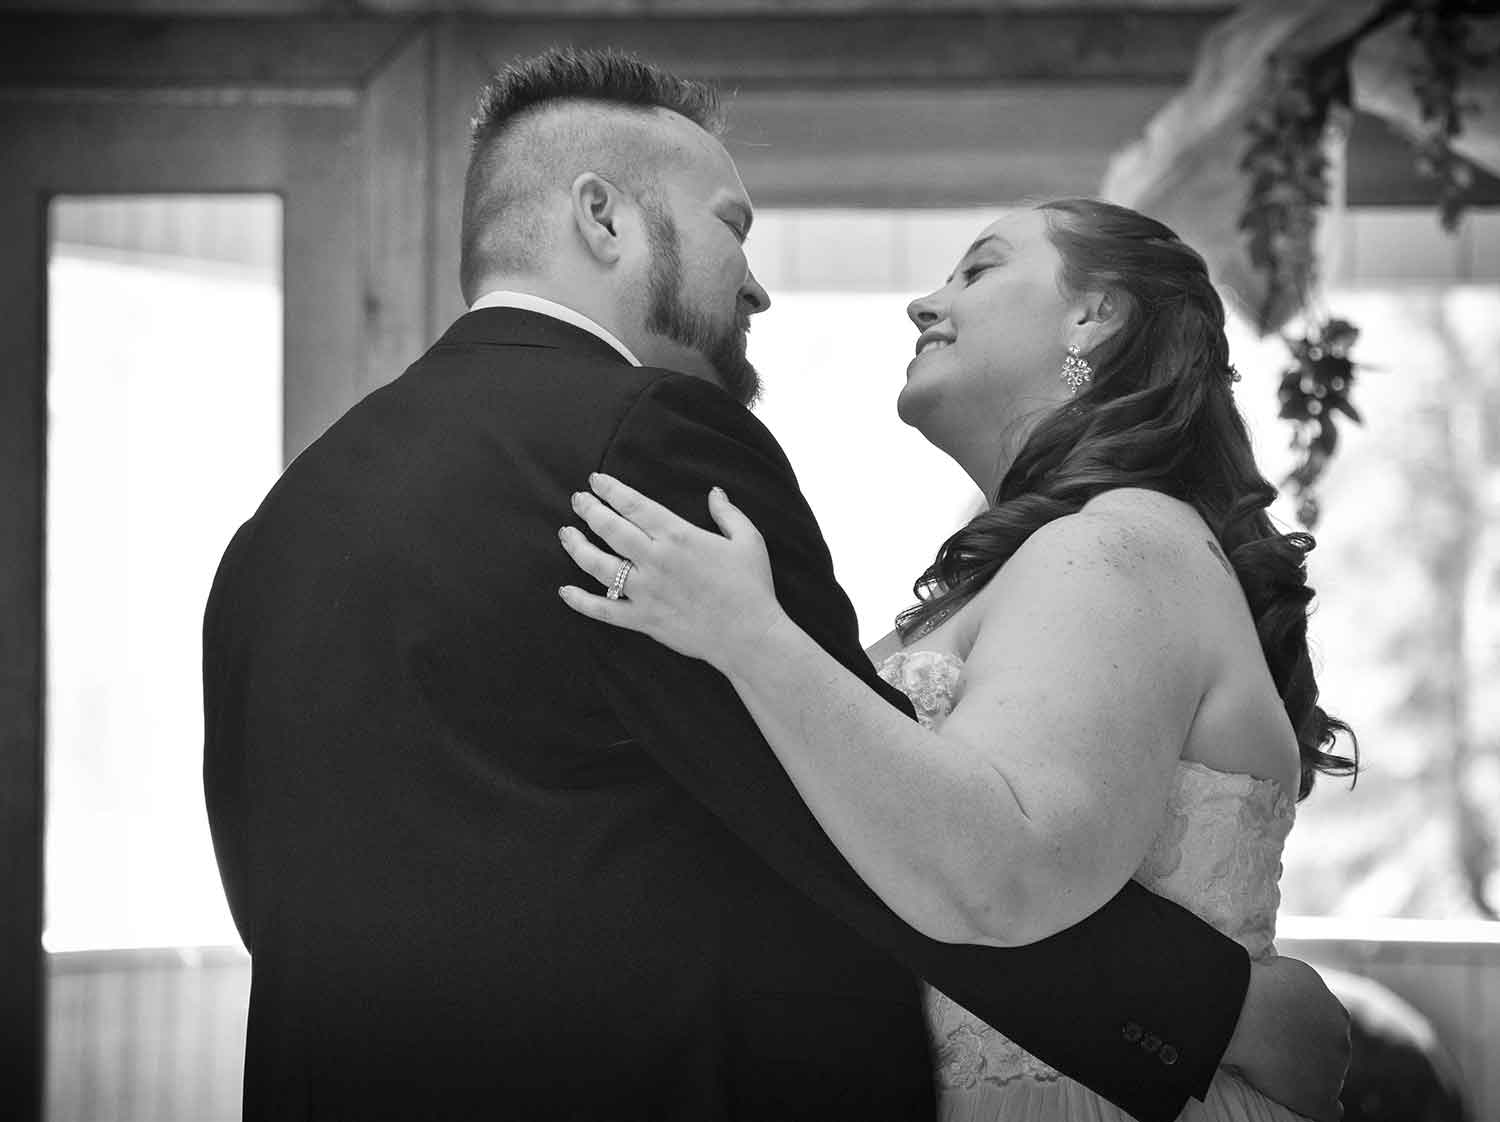 Melissa Lanasa and Darrell Adam Stallings married at Cove Lake Community Center on April 9, 2016. The couple enjoys their first dance together as man and wife.photos by Brianna Bivens - 2016